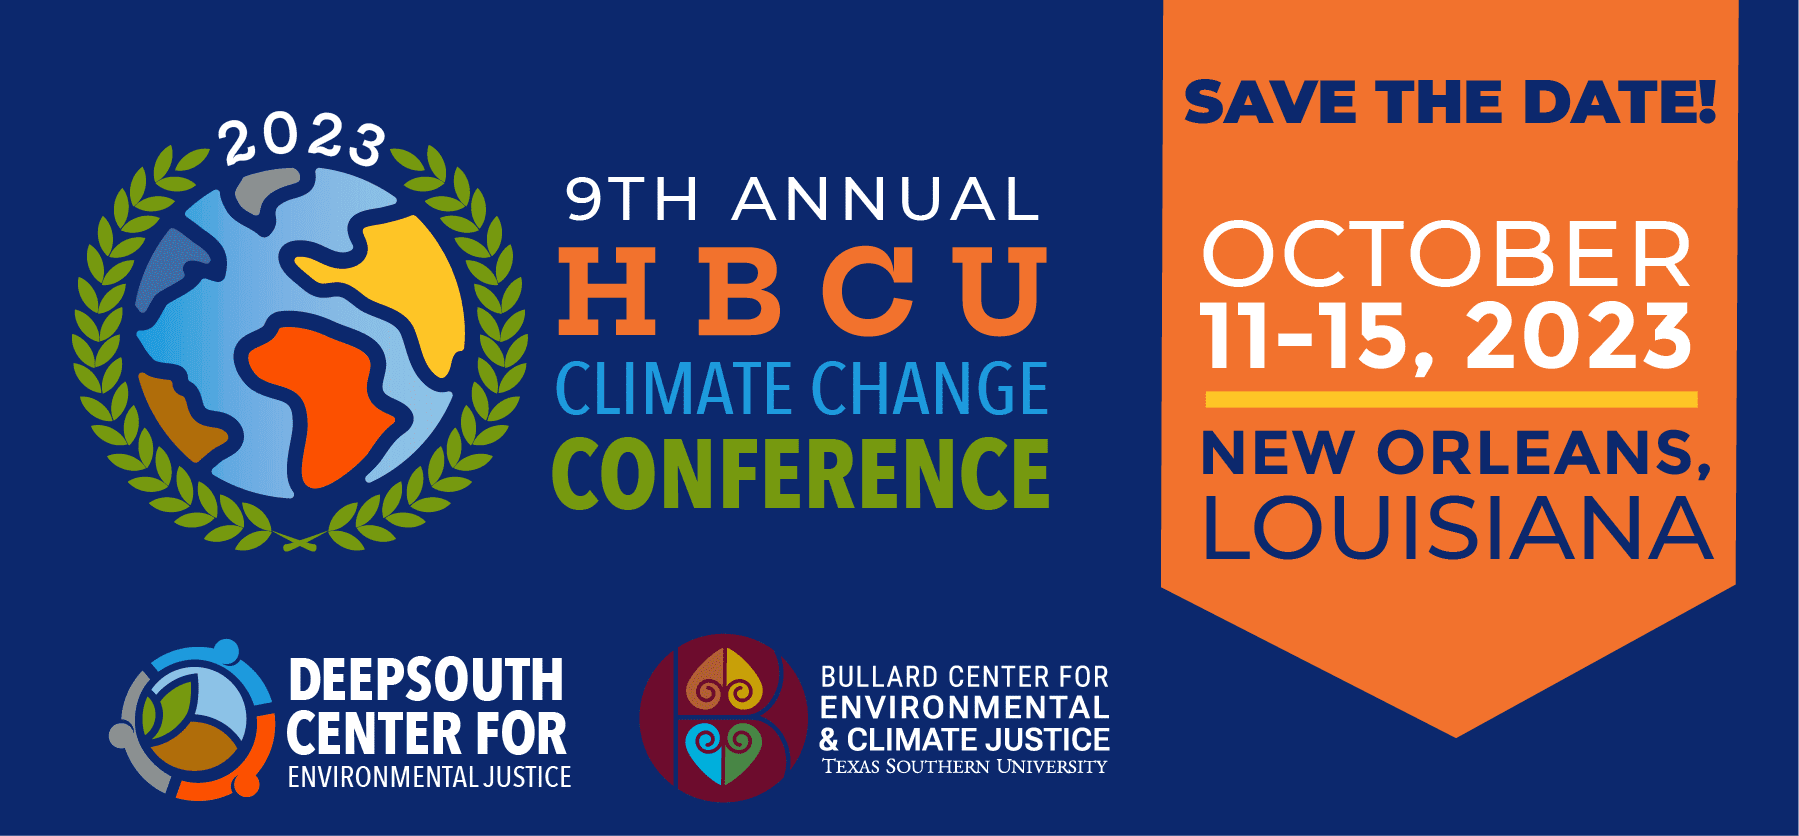 A banner that says 9 th annual hbcu climate change conference.